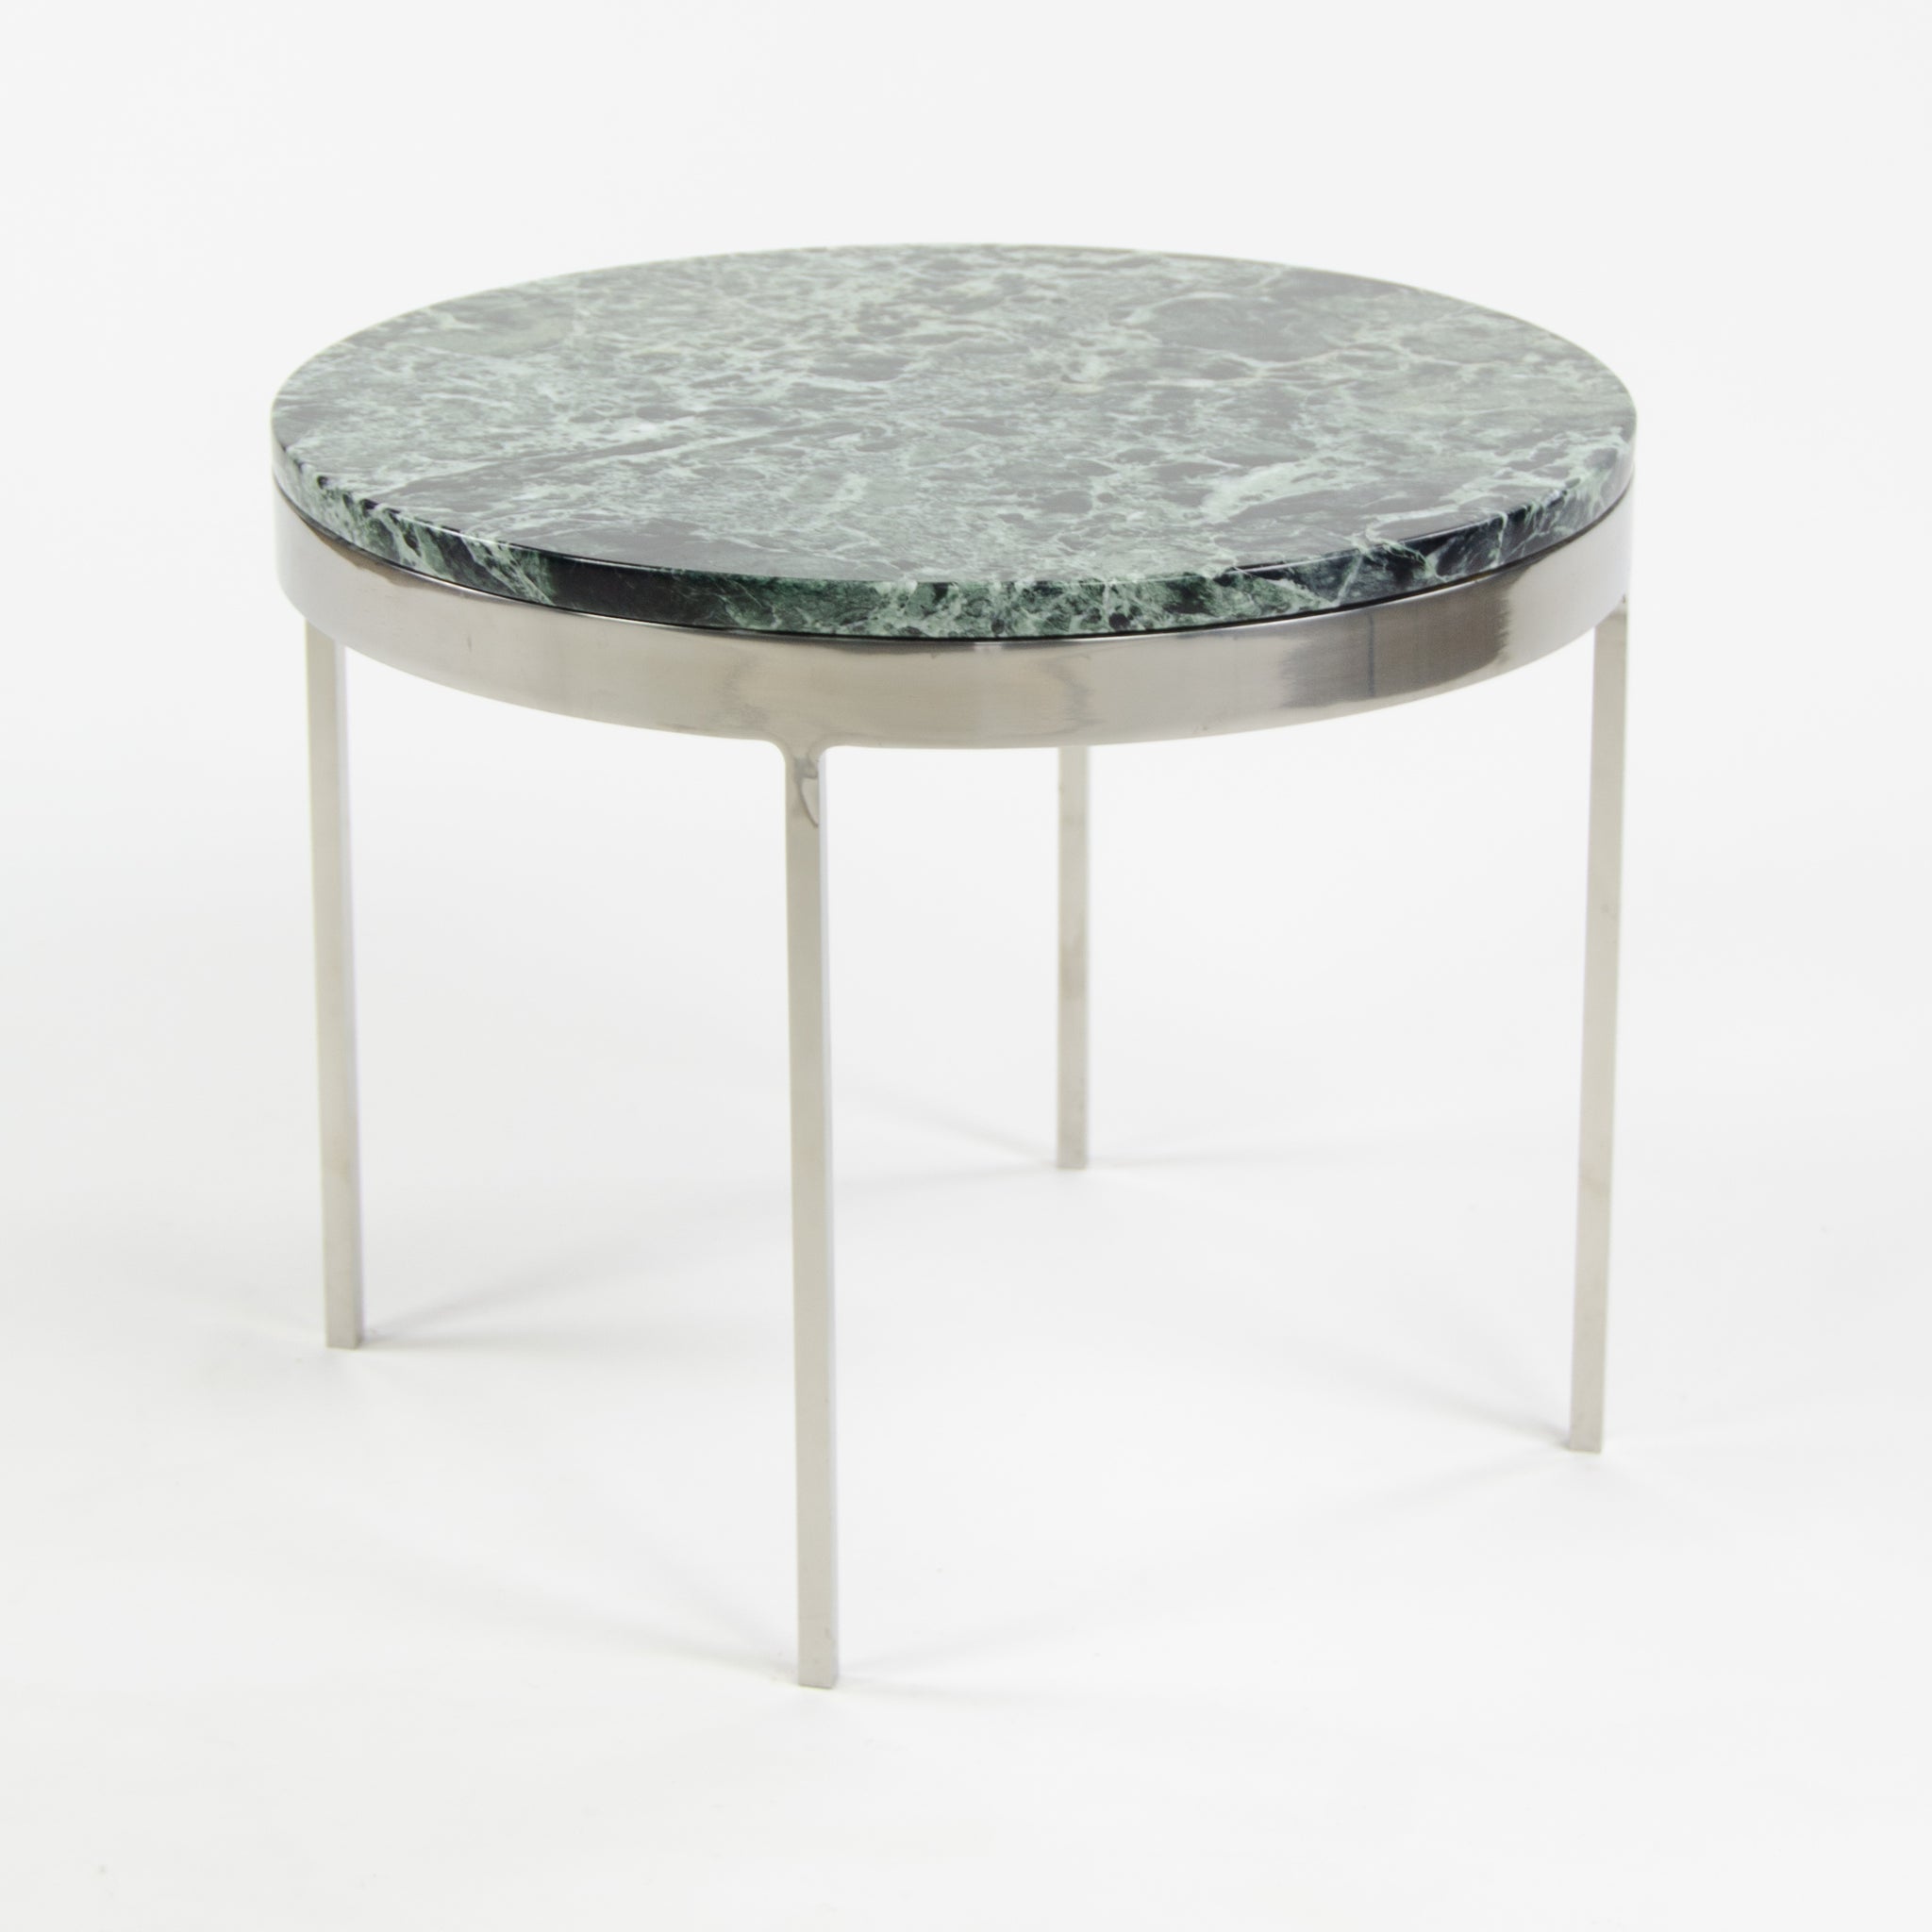 SOLD Nicos Zographos Designs Limited Stainless Side End Table